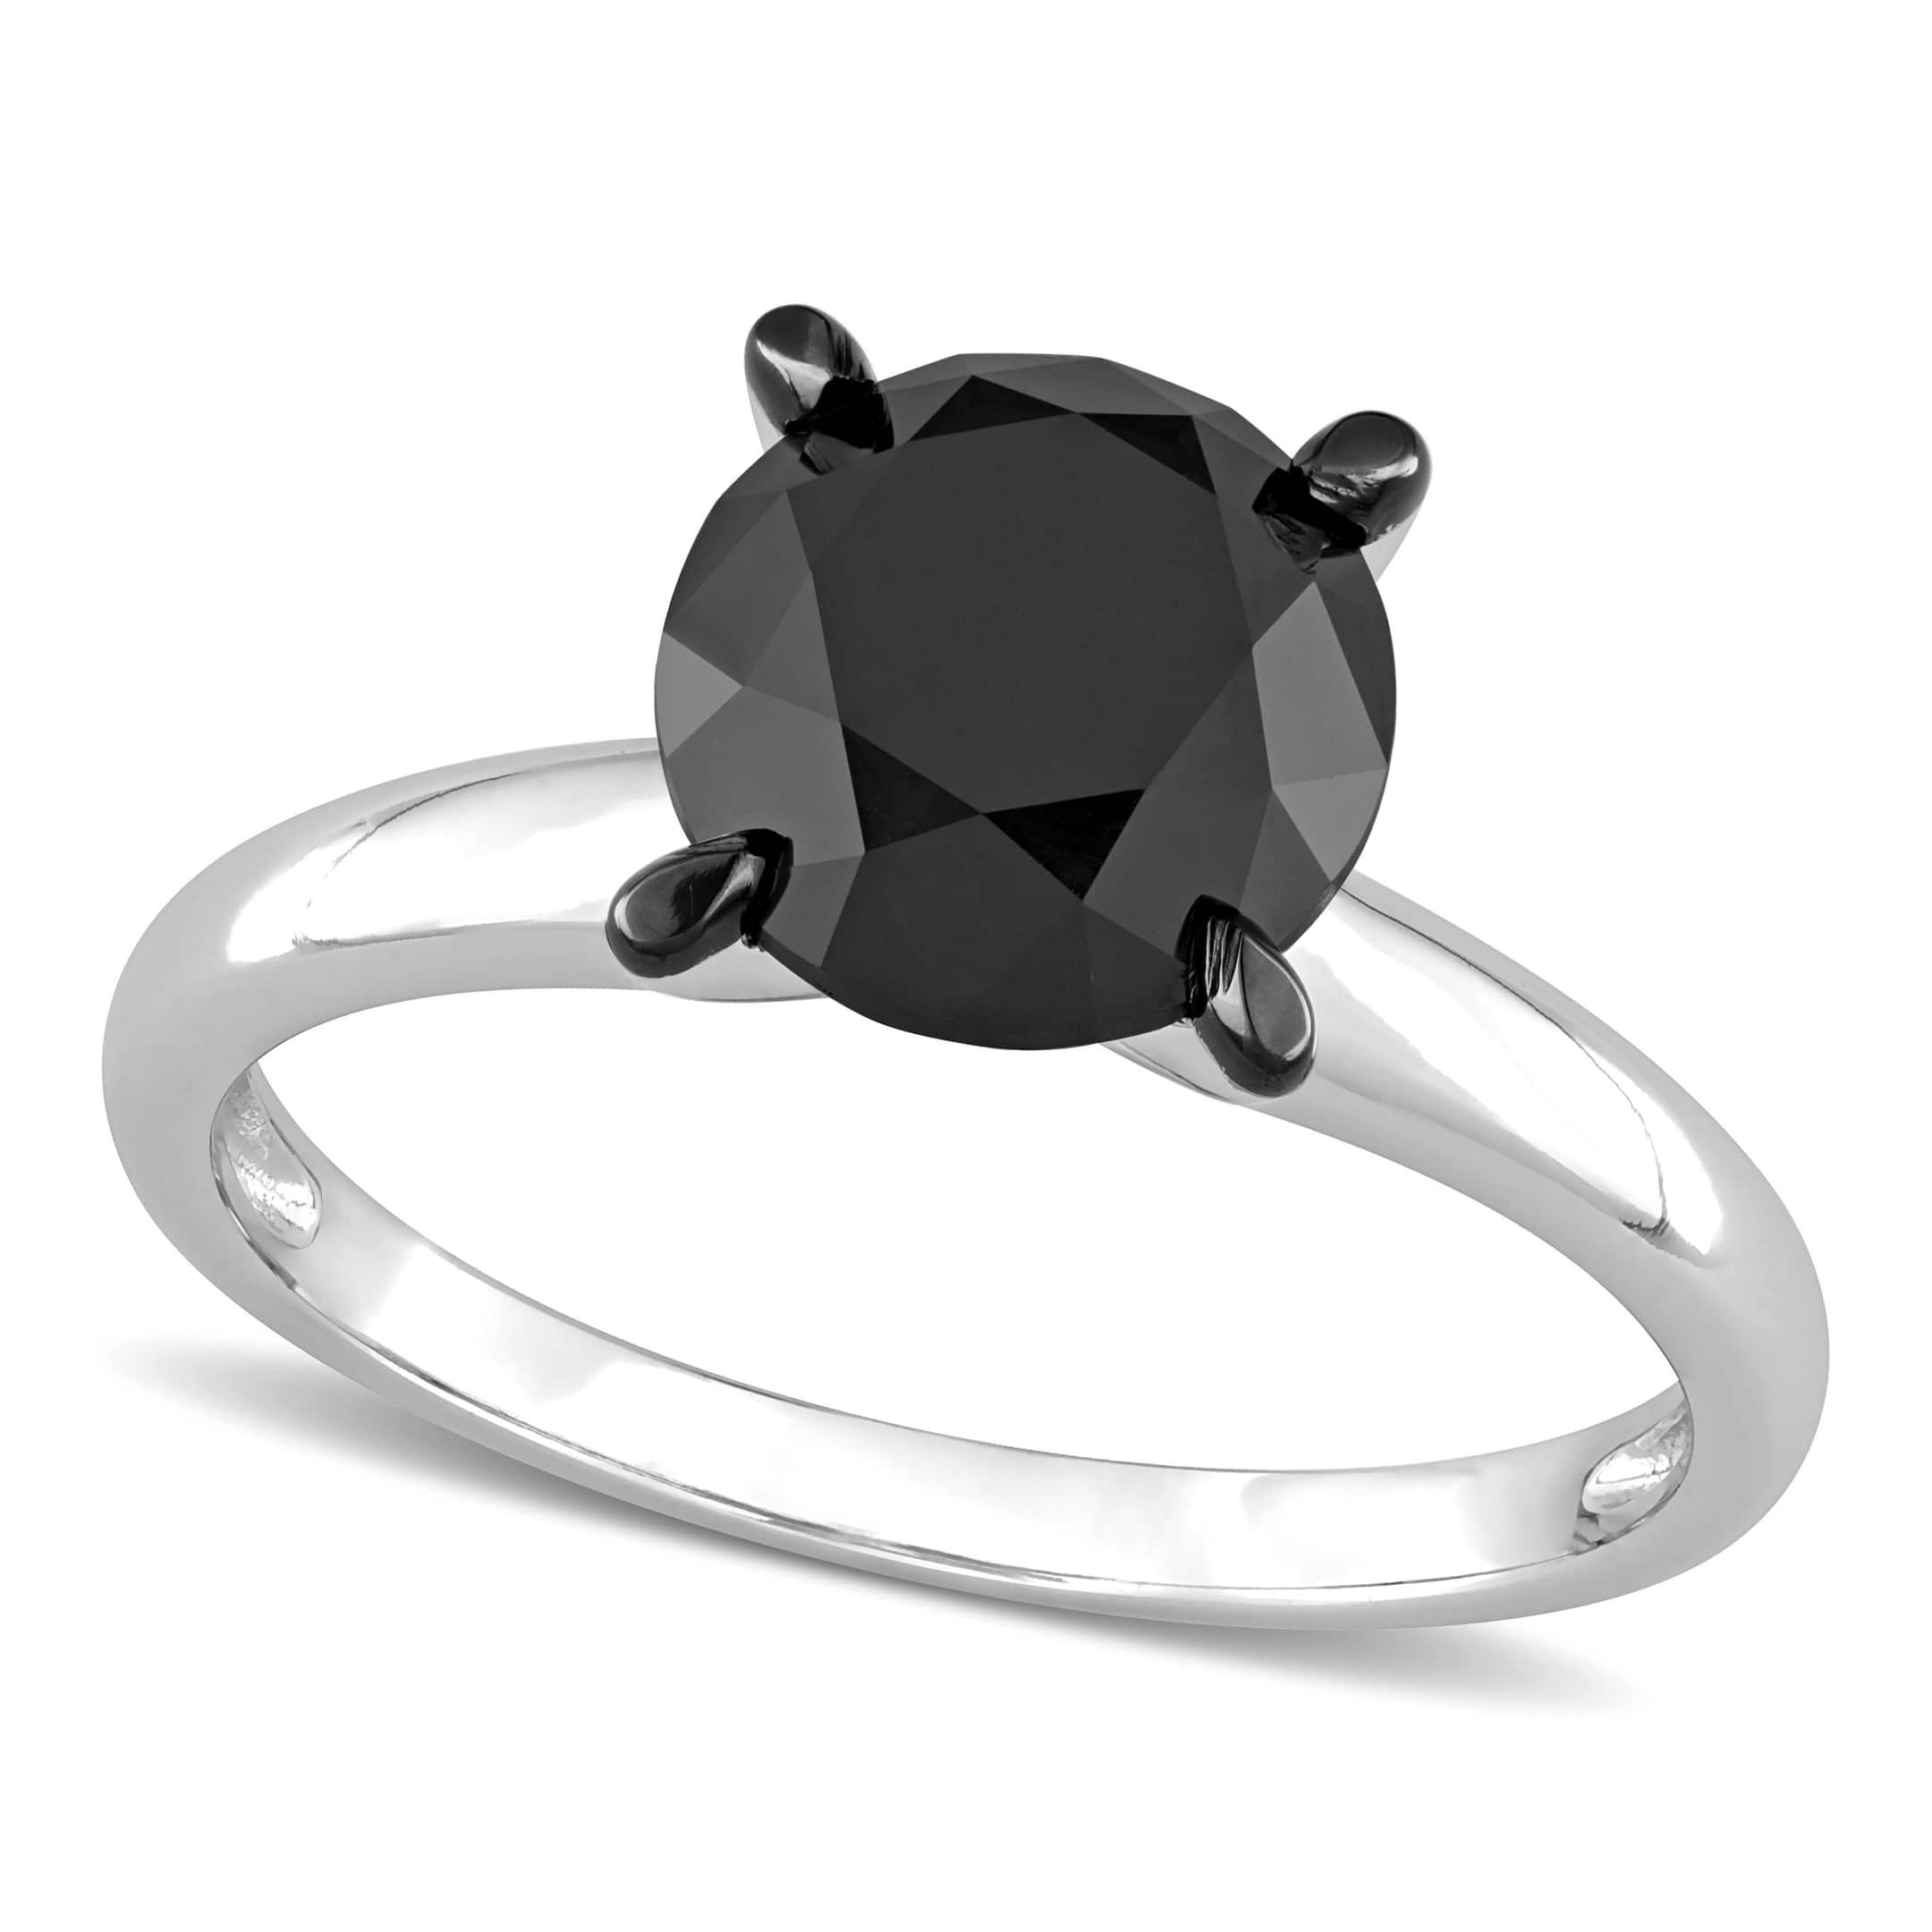 Round Cut Black Diamond Solitaire Ring in 14k White Gold (3.00ct)